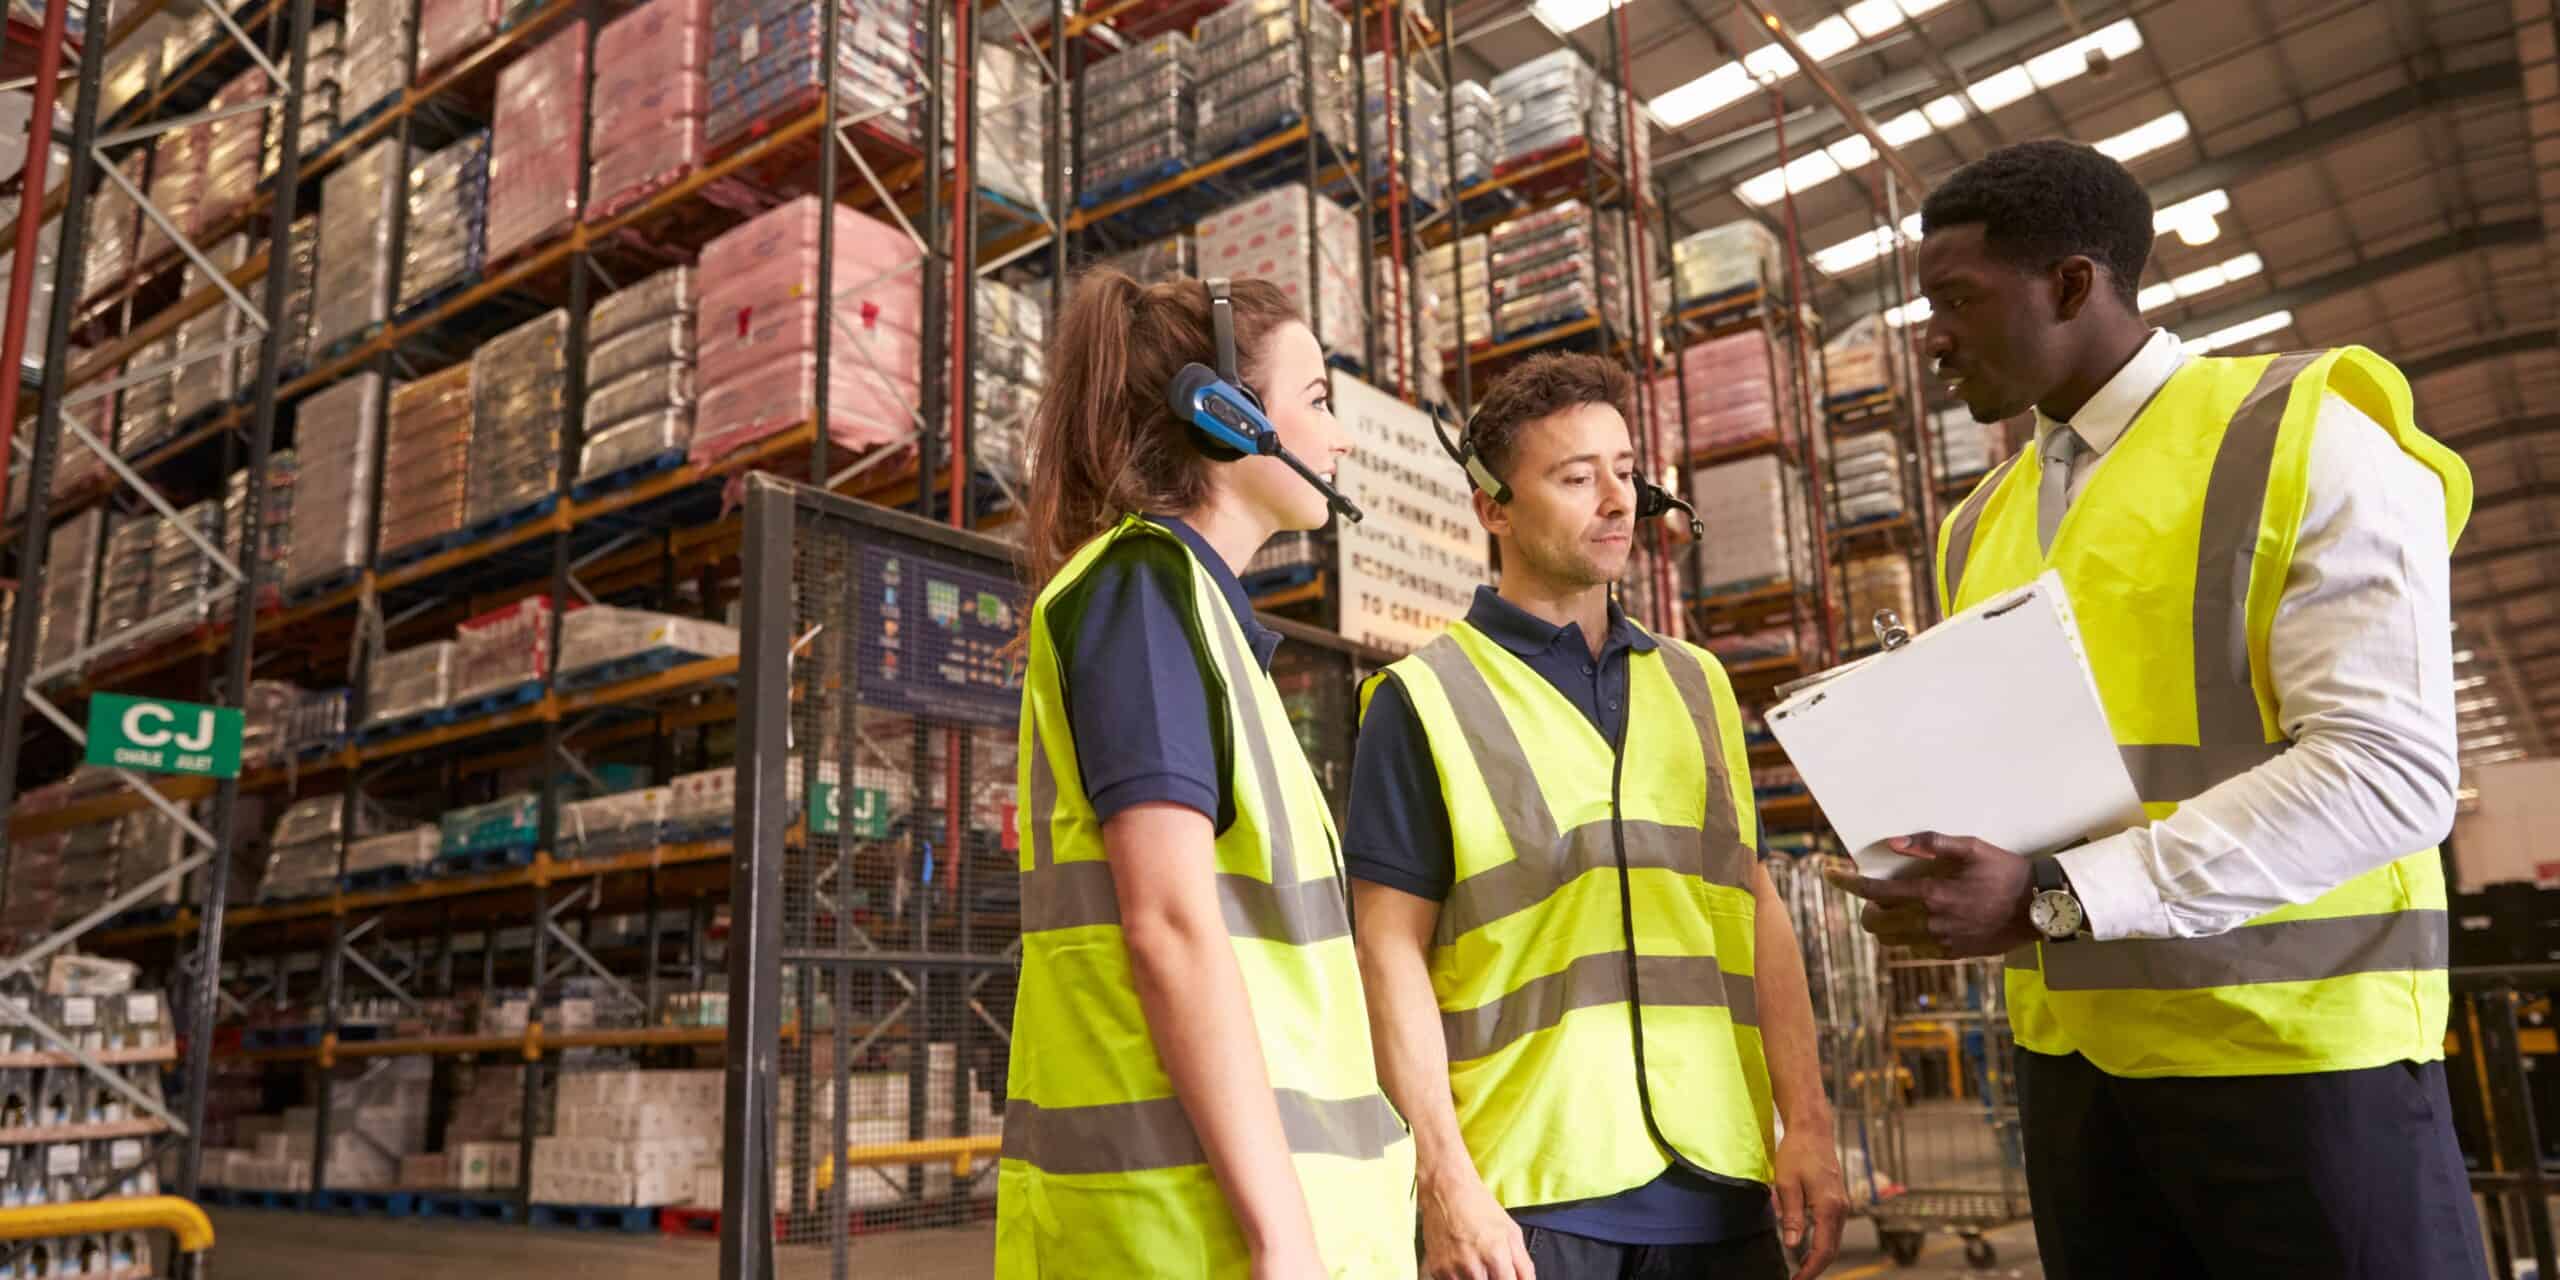 fulfillment centers for small businesses